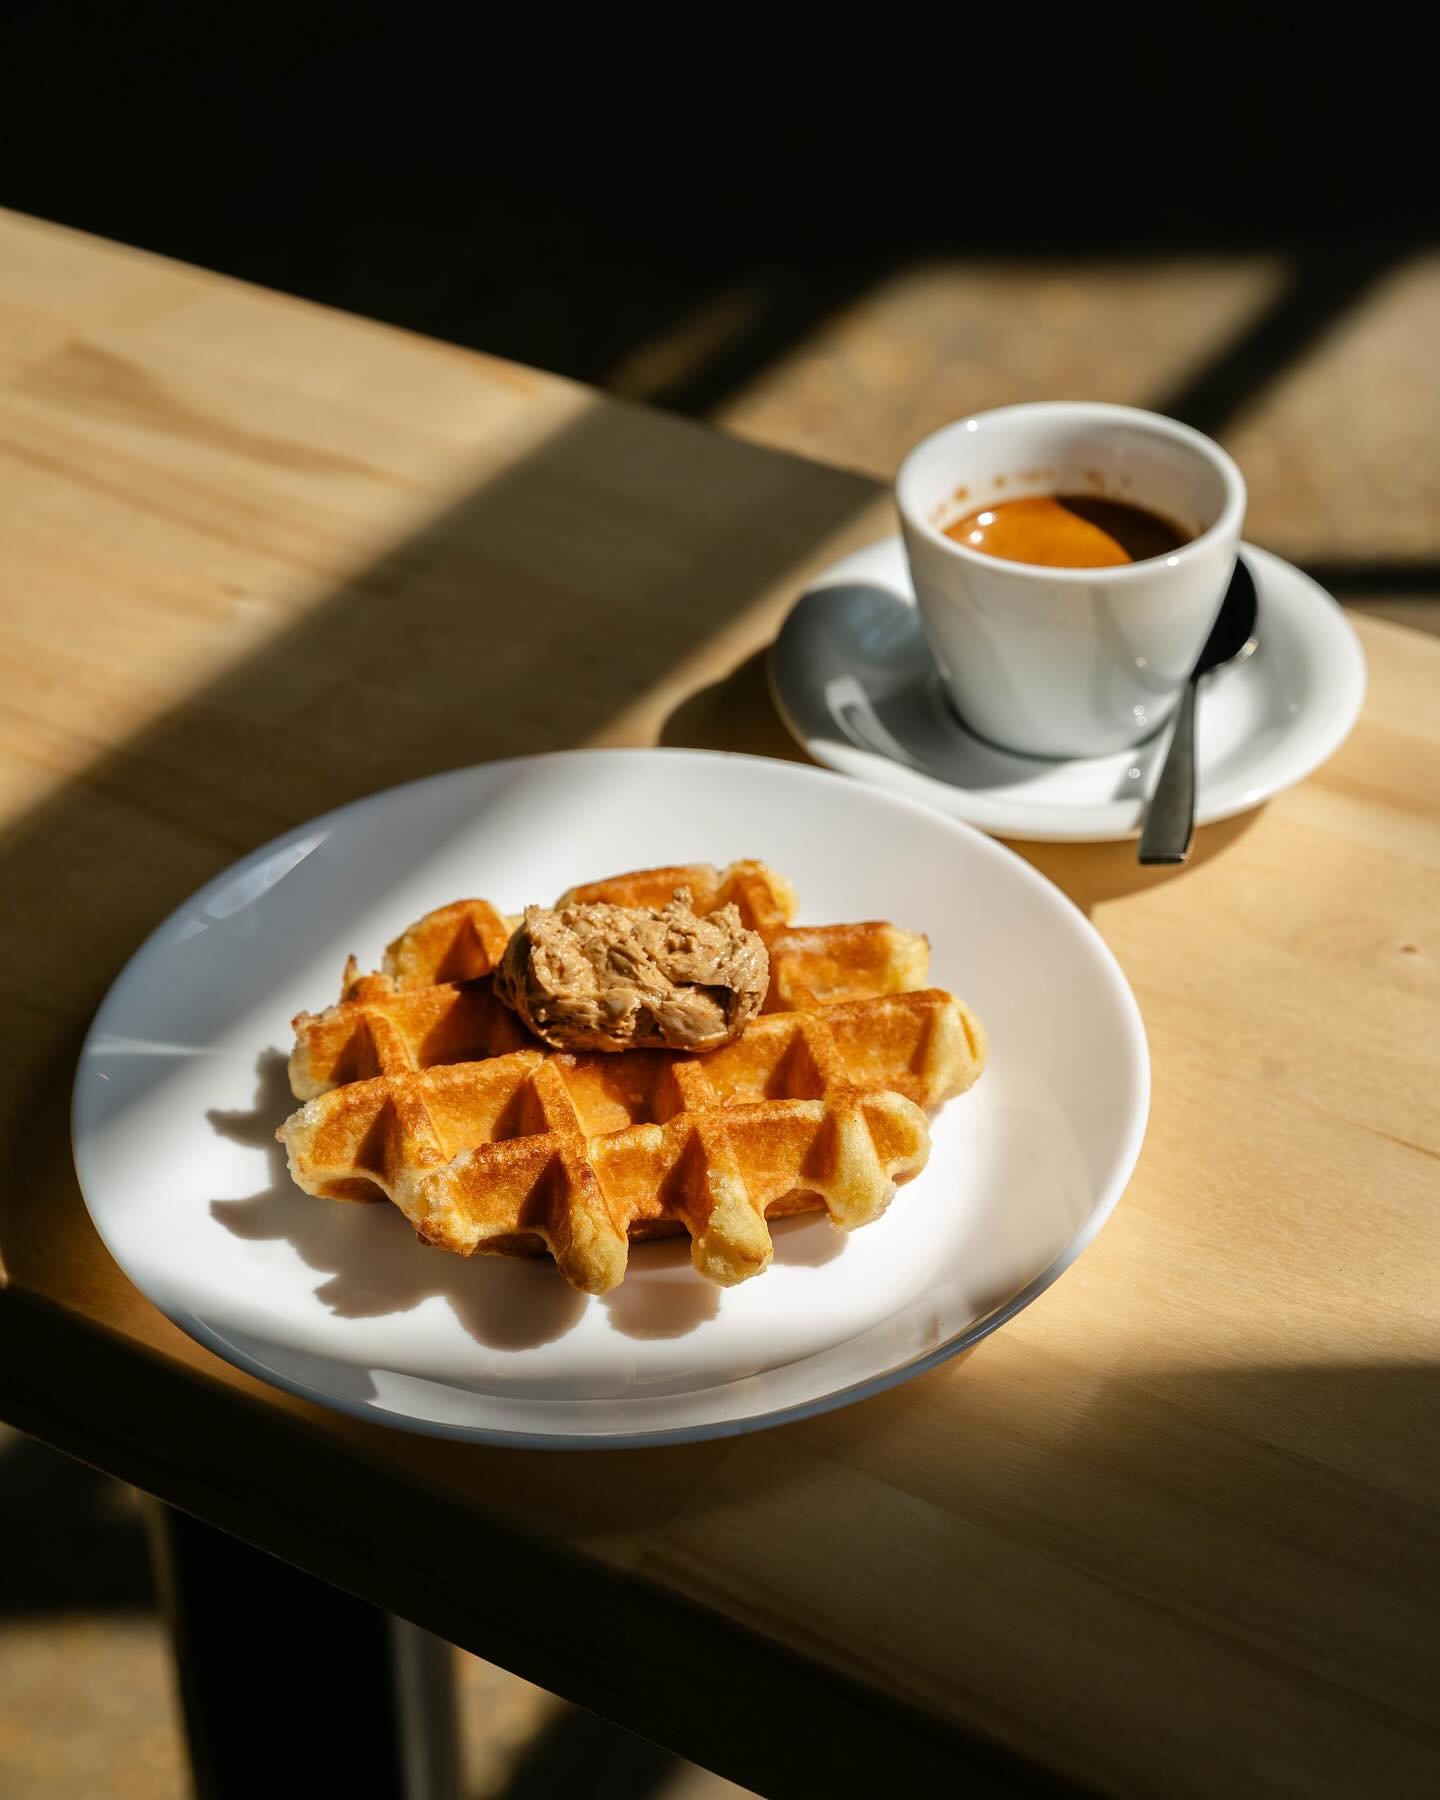 A waffle and espresso is just the pairing you&rsquo;ll need for your morning grind. Come on in.

#coalescencecoffee